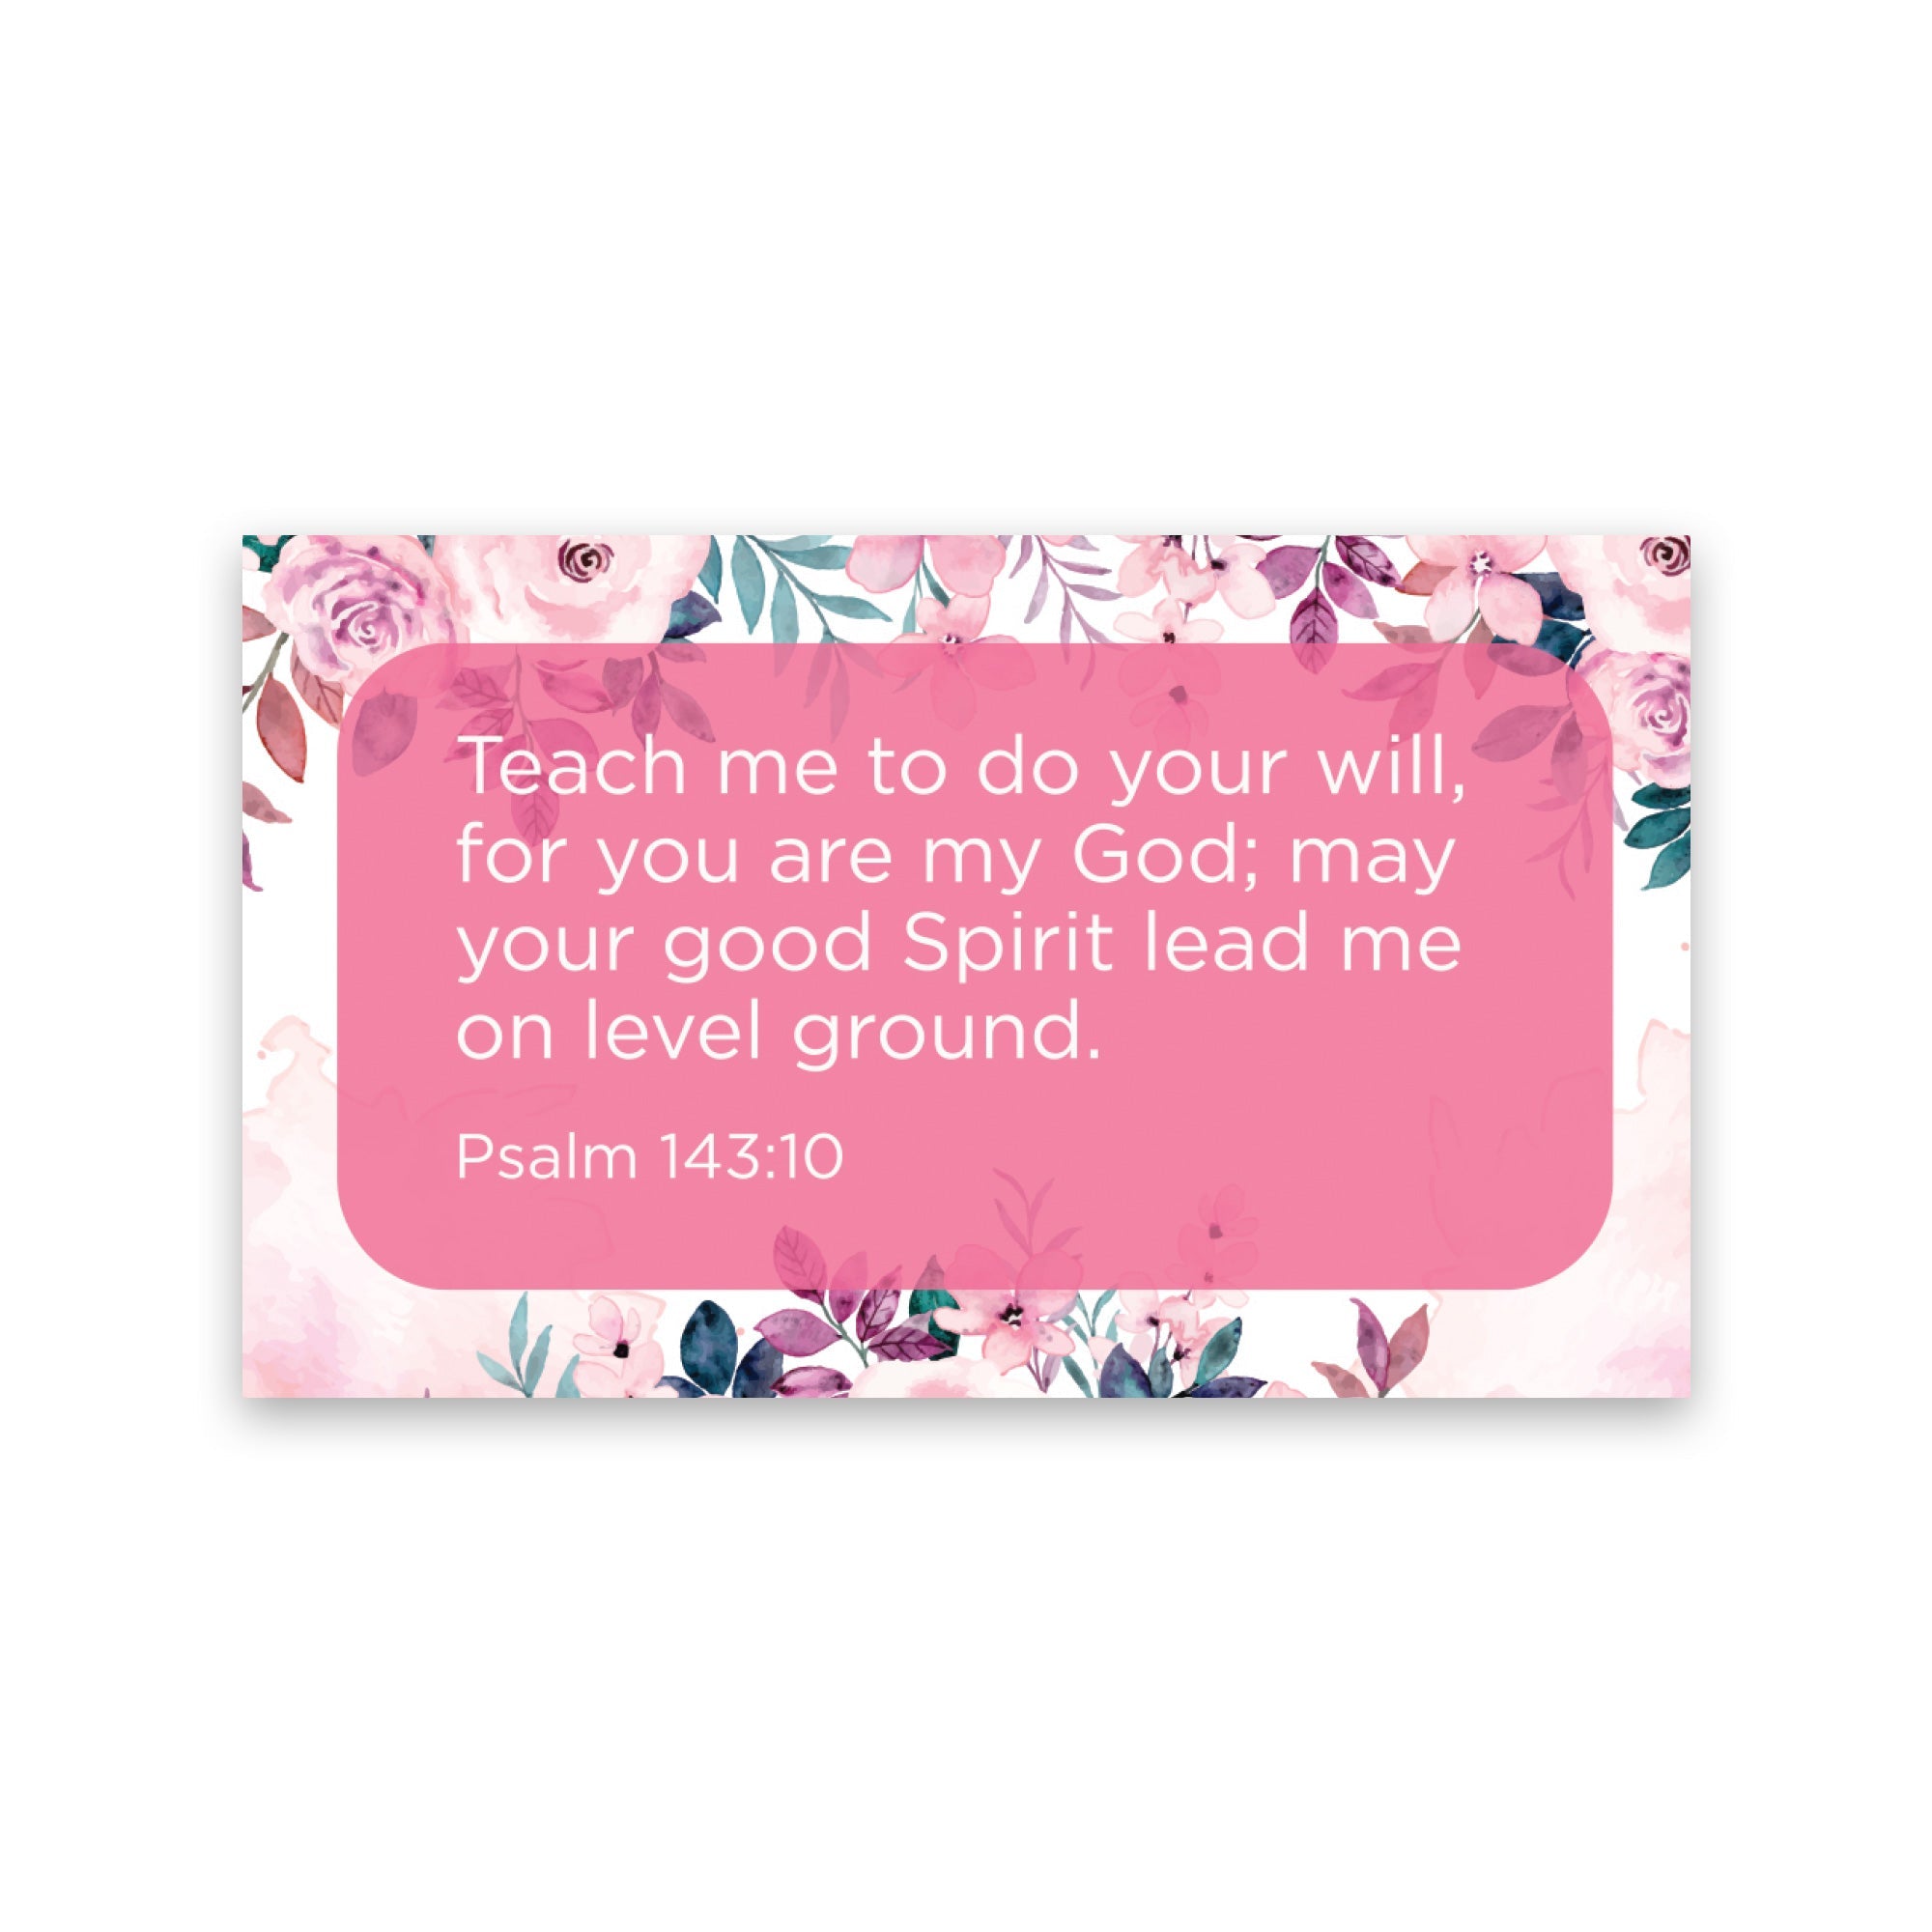 Teach me to do your will, Psalm 143:10, Pass Along Scripture Cards, Pack of 25